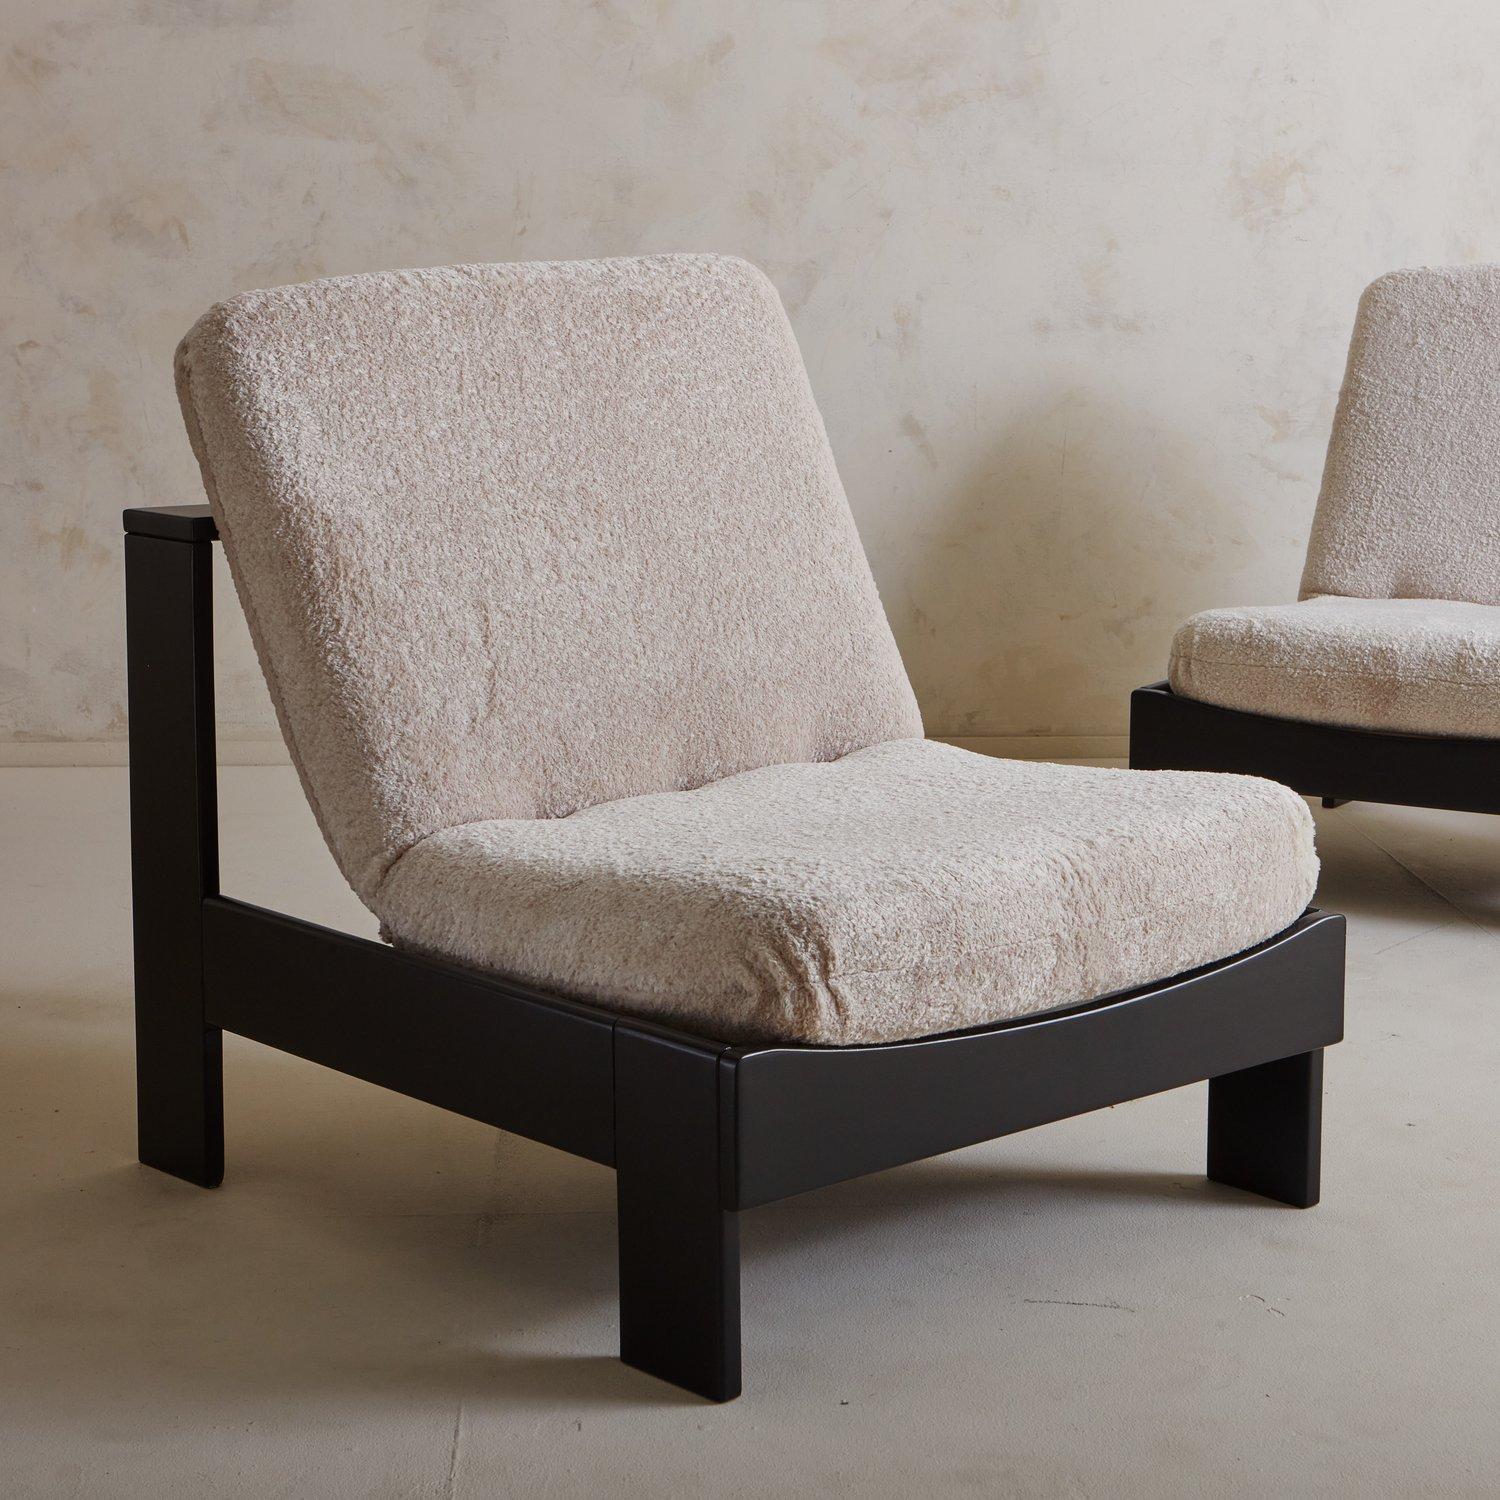 Black Wood Frame Lounge Chair in Cream Shearling, France, 20th Century In Good Condition For Sale In Chicago, IL